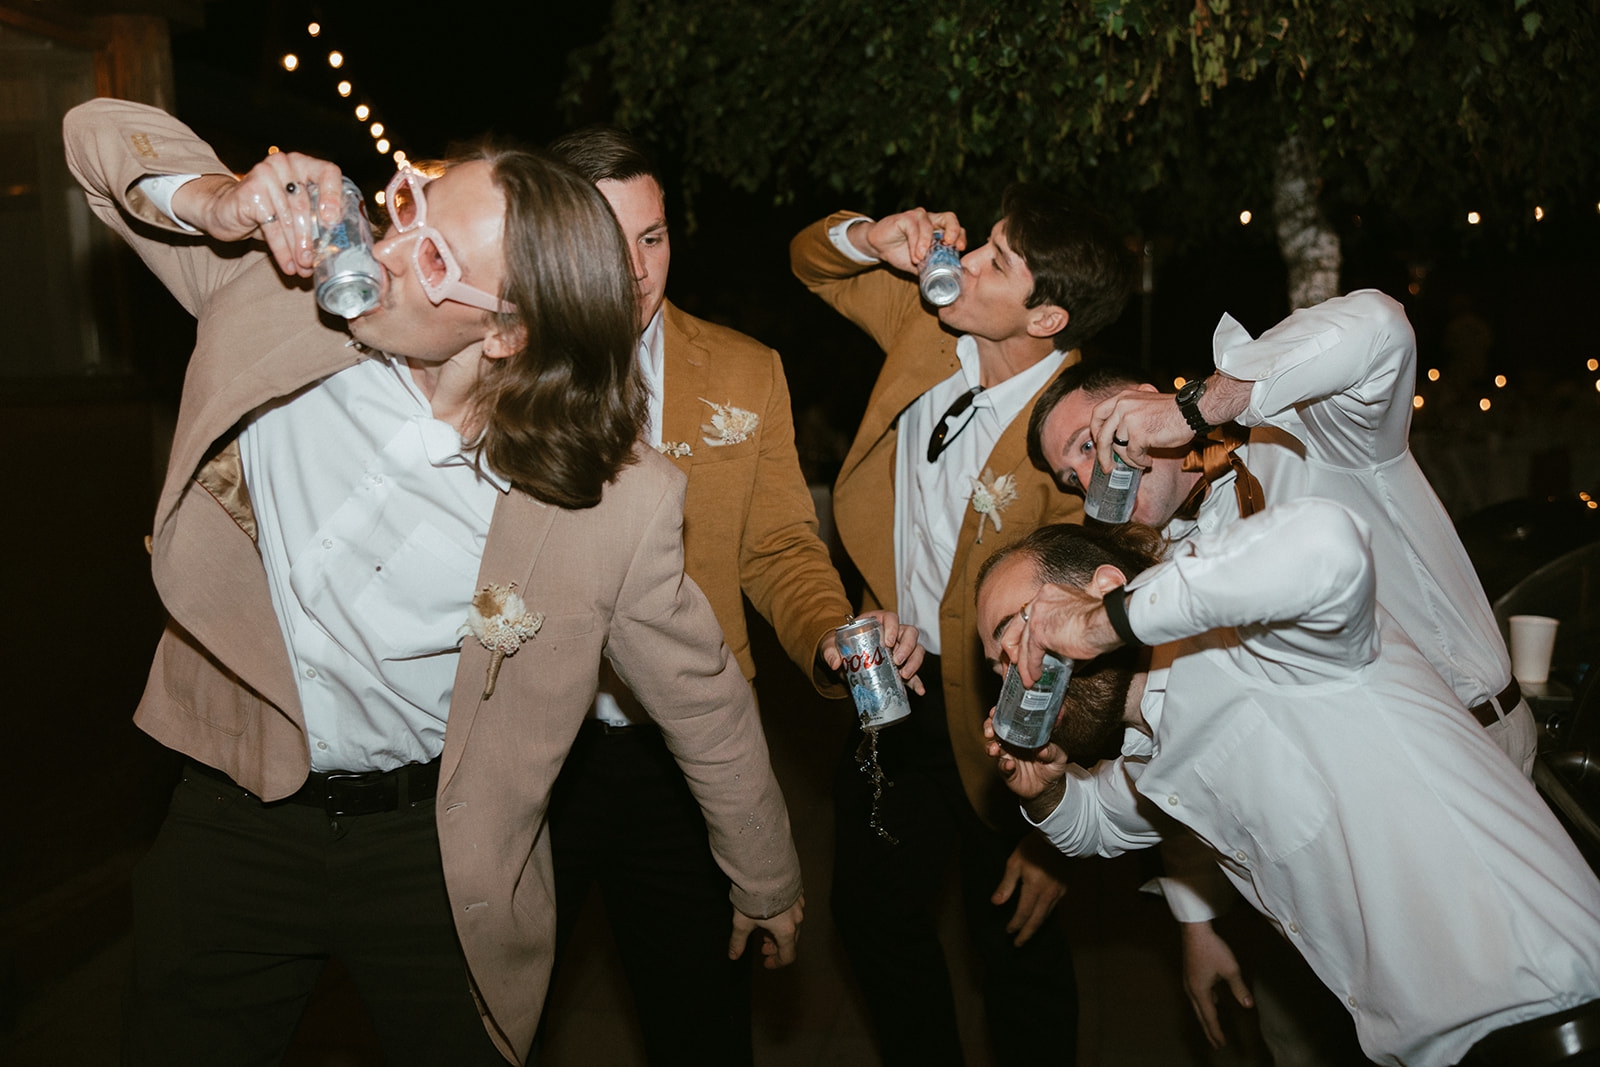 Guests chugging beers during wedding reception